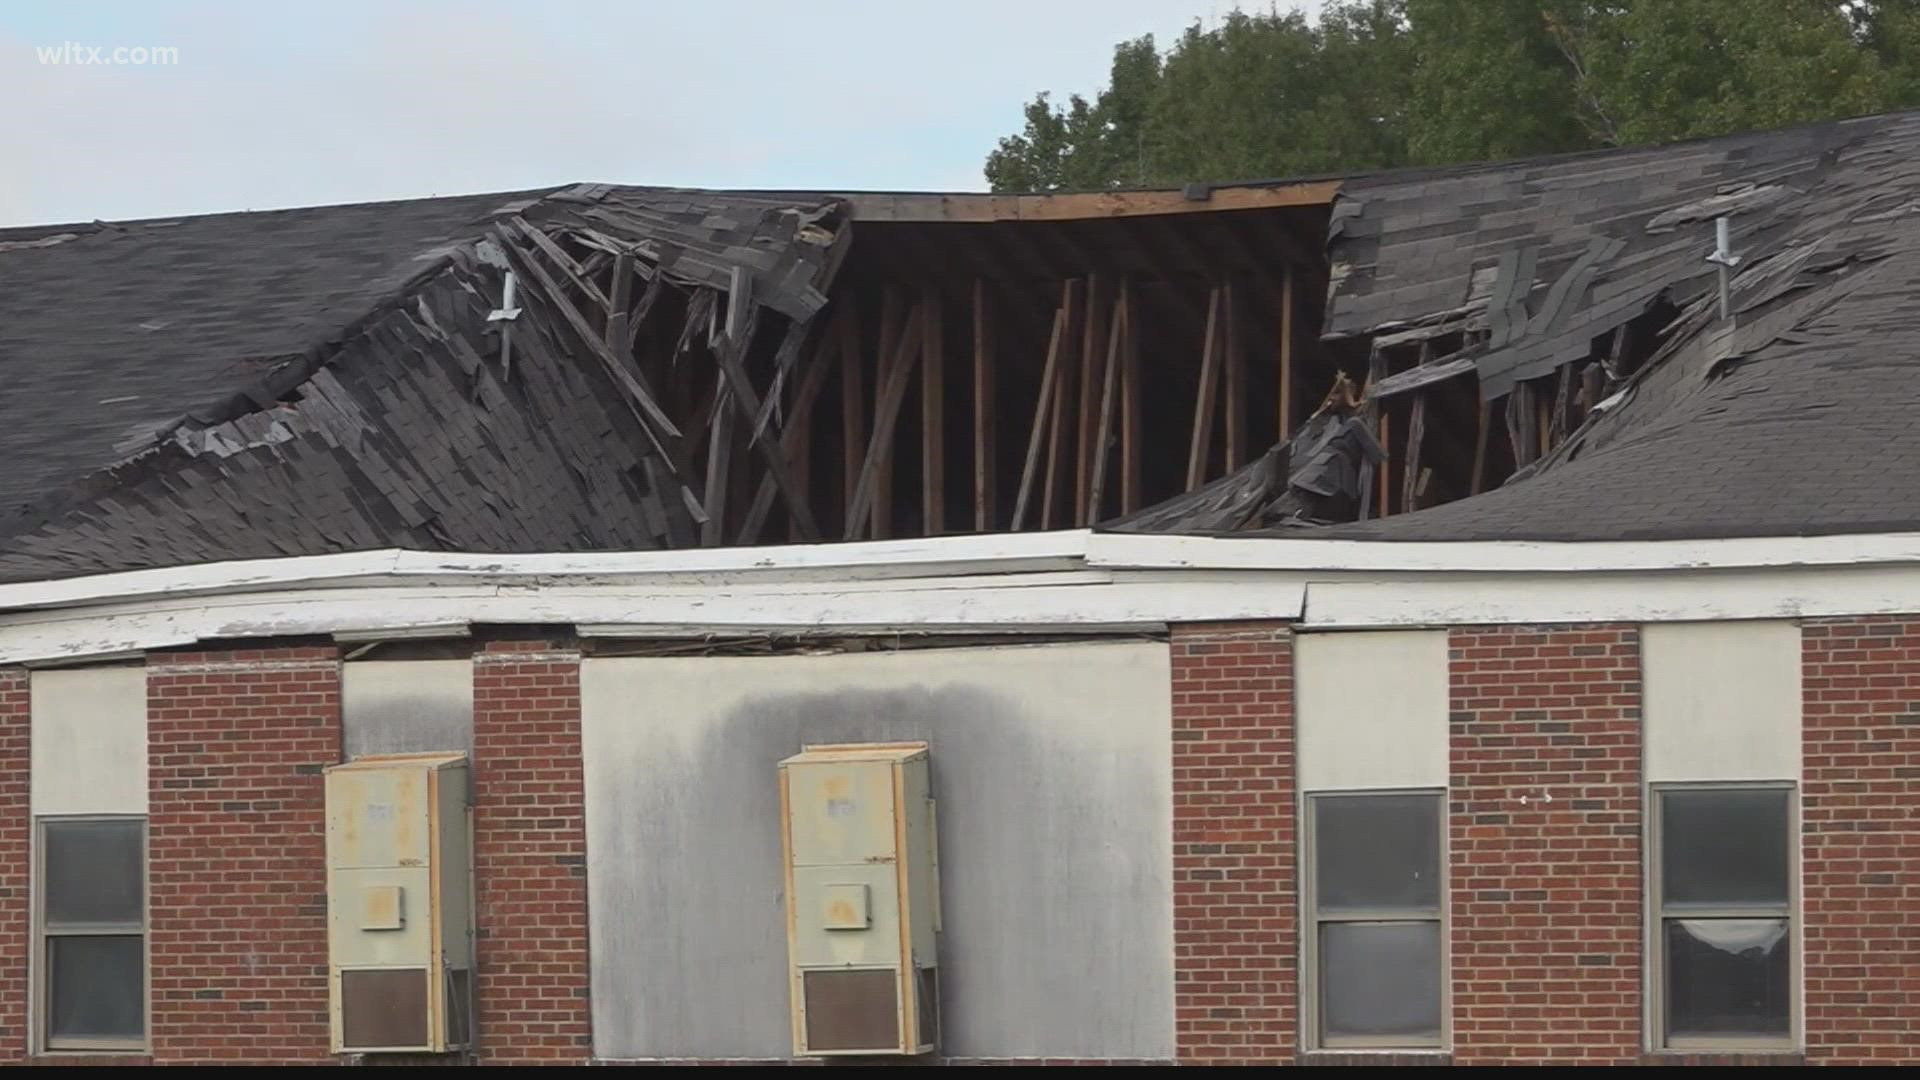 Superintendent of Lee County School District Bernard McDaniel's talks about the gaping hole in the roof Dennis Elementary School.